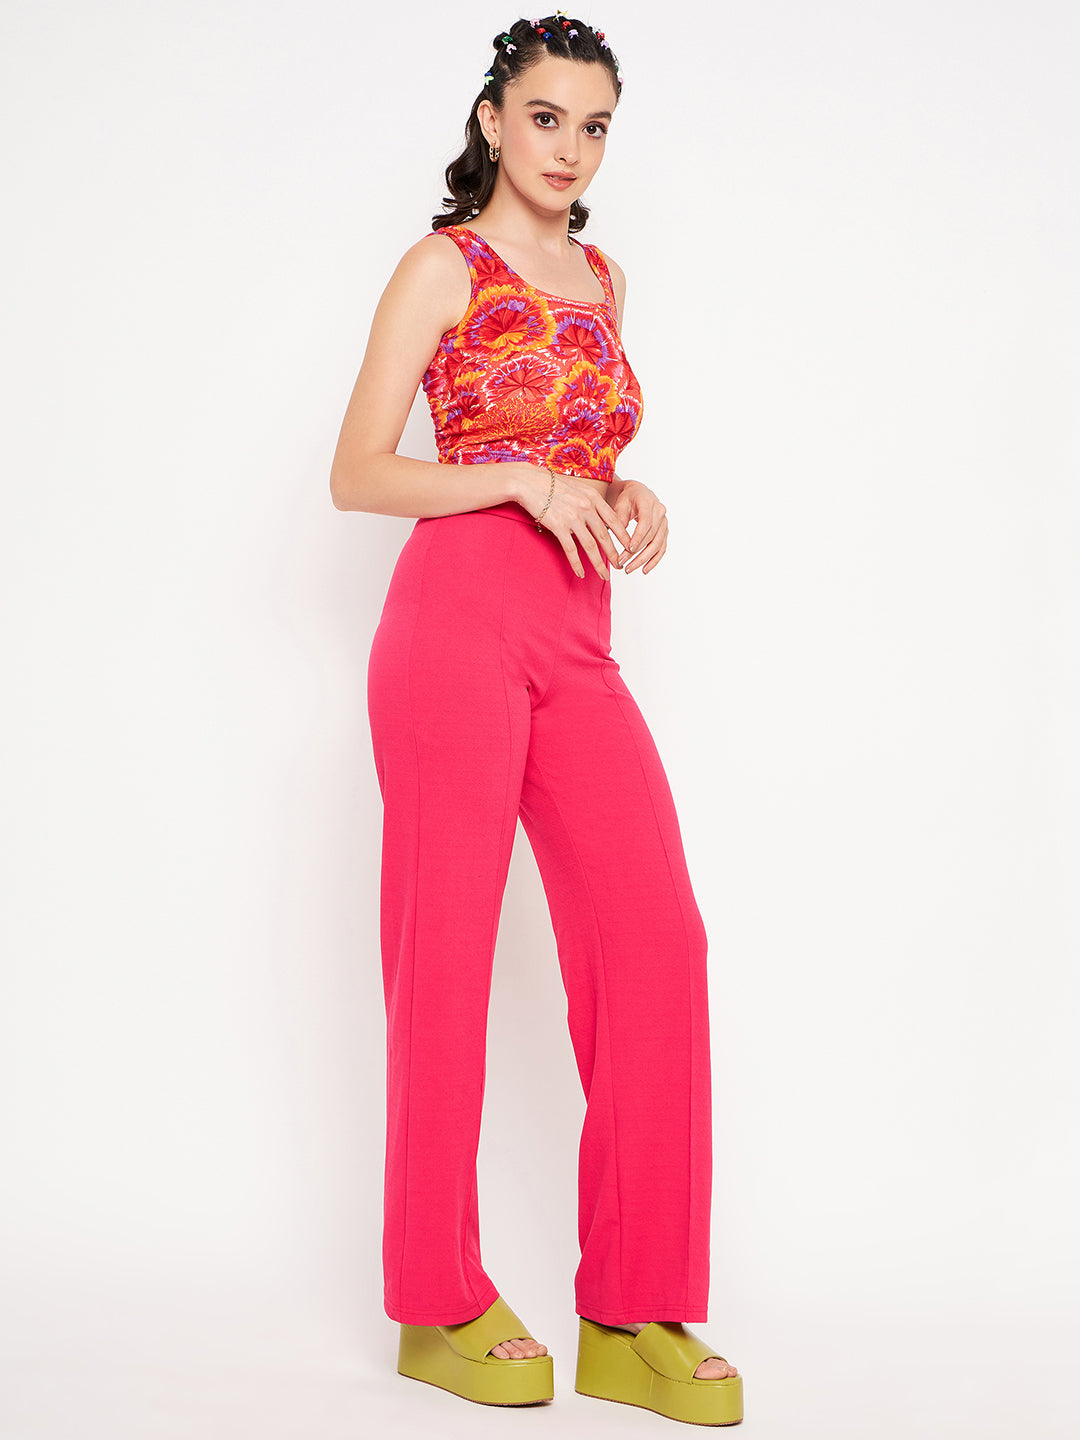 High Waisted Stretchy Parallel Pants - Uptownie